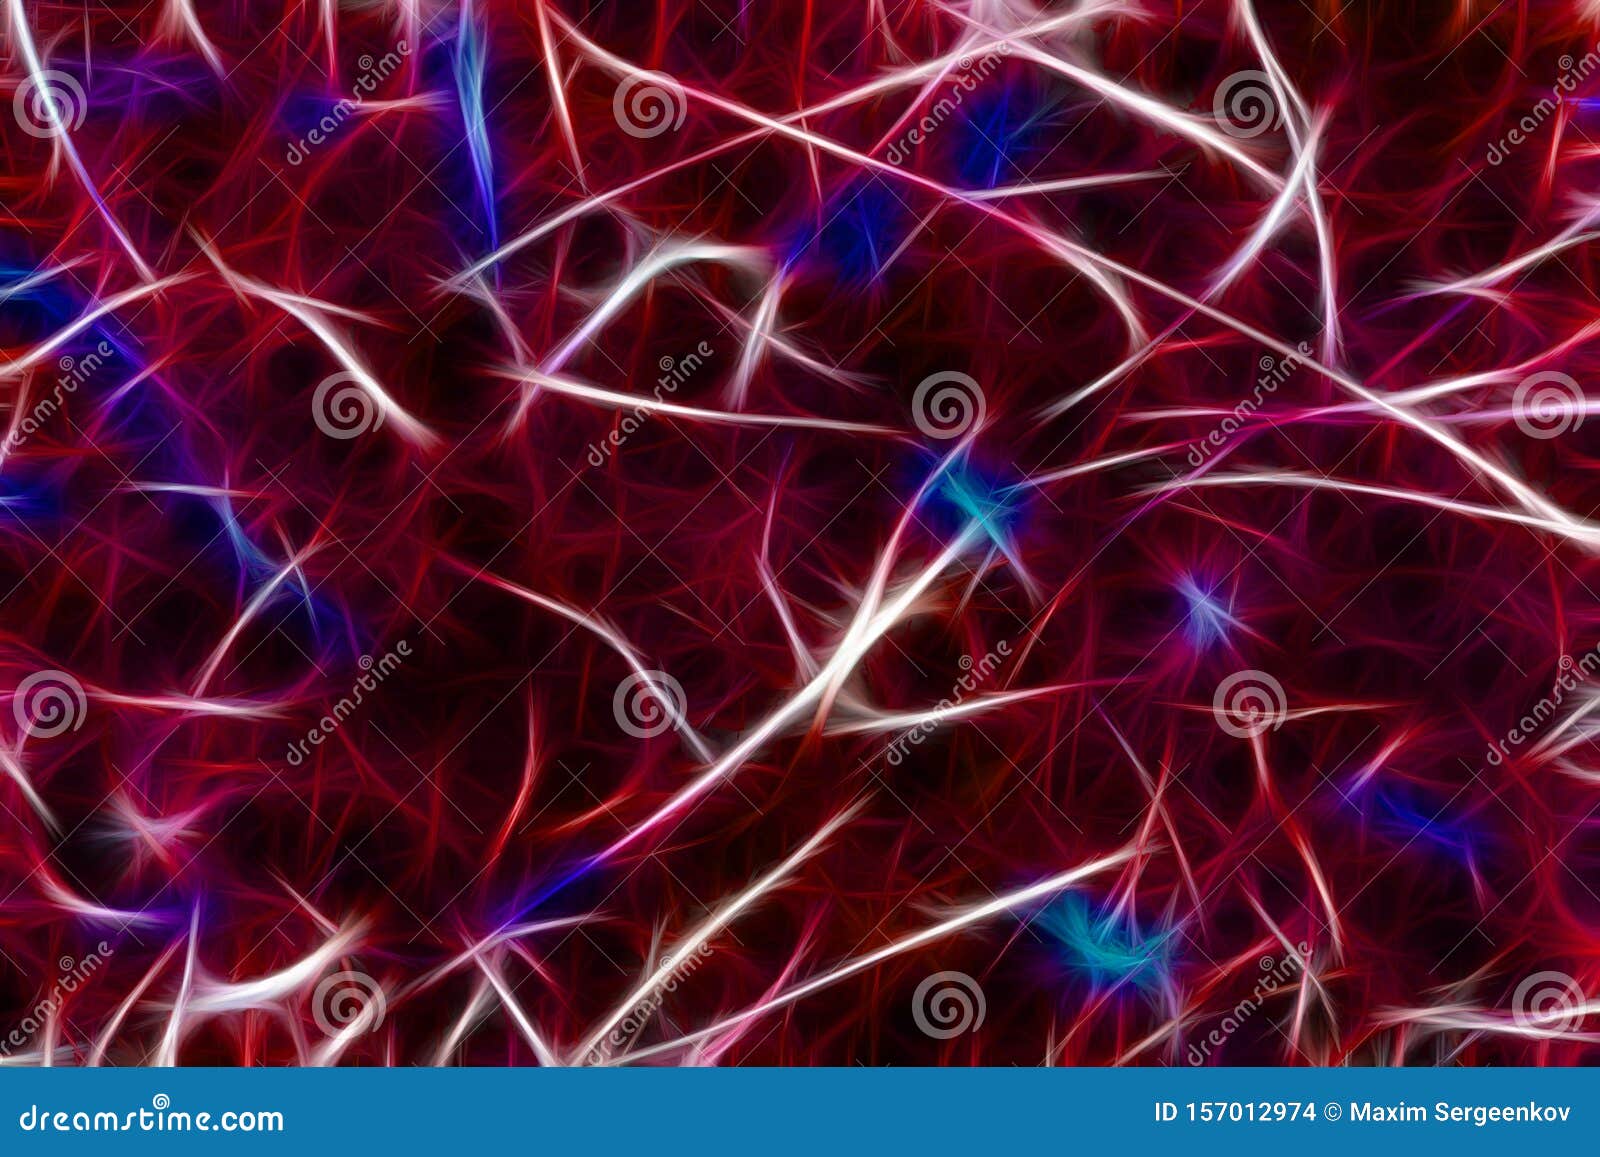 Background With Neurons And Synapse Stuctures Showing Human Brain Cells ...